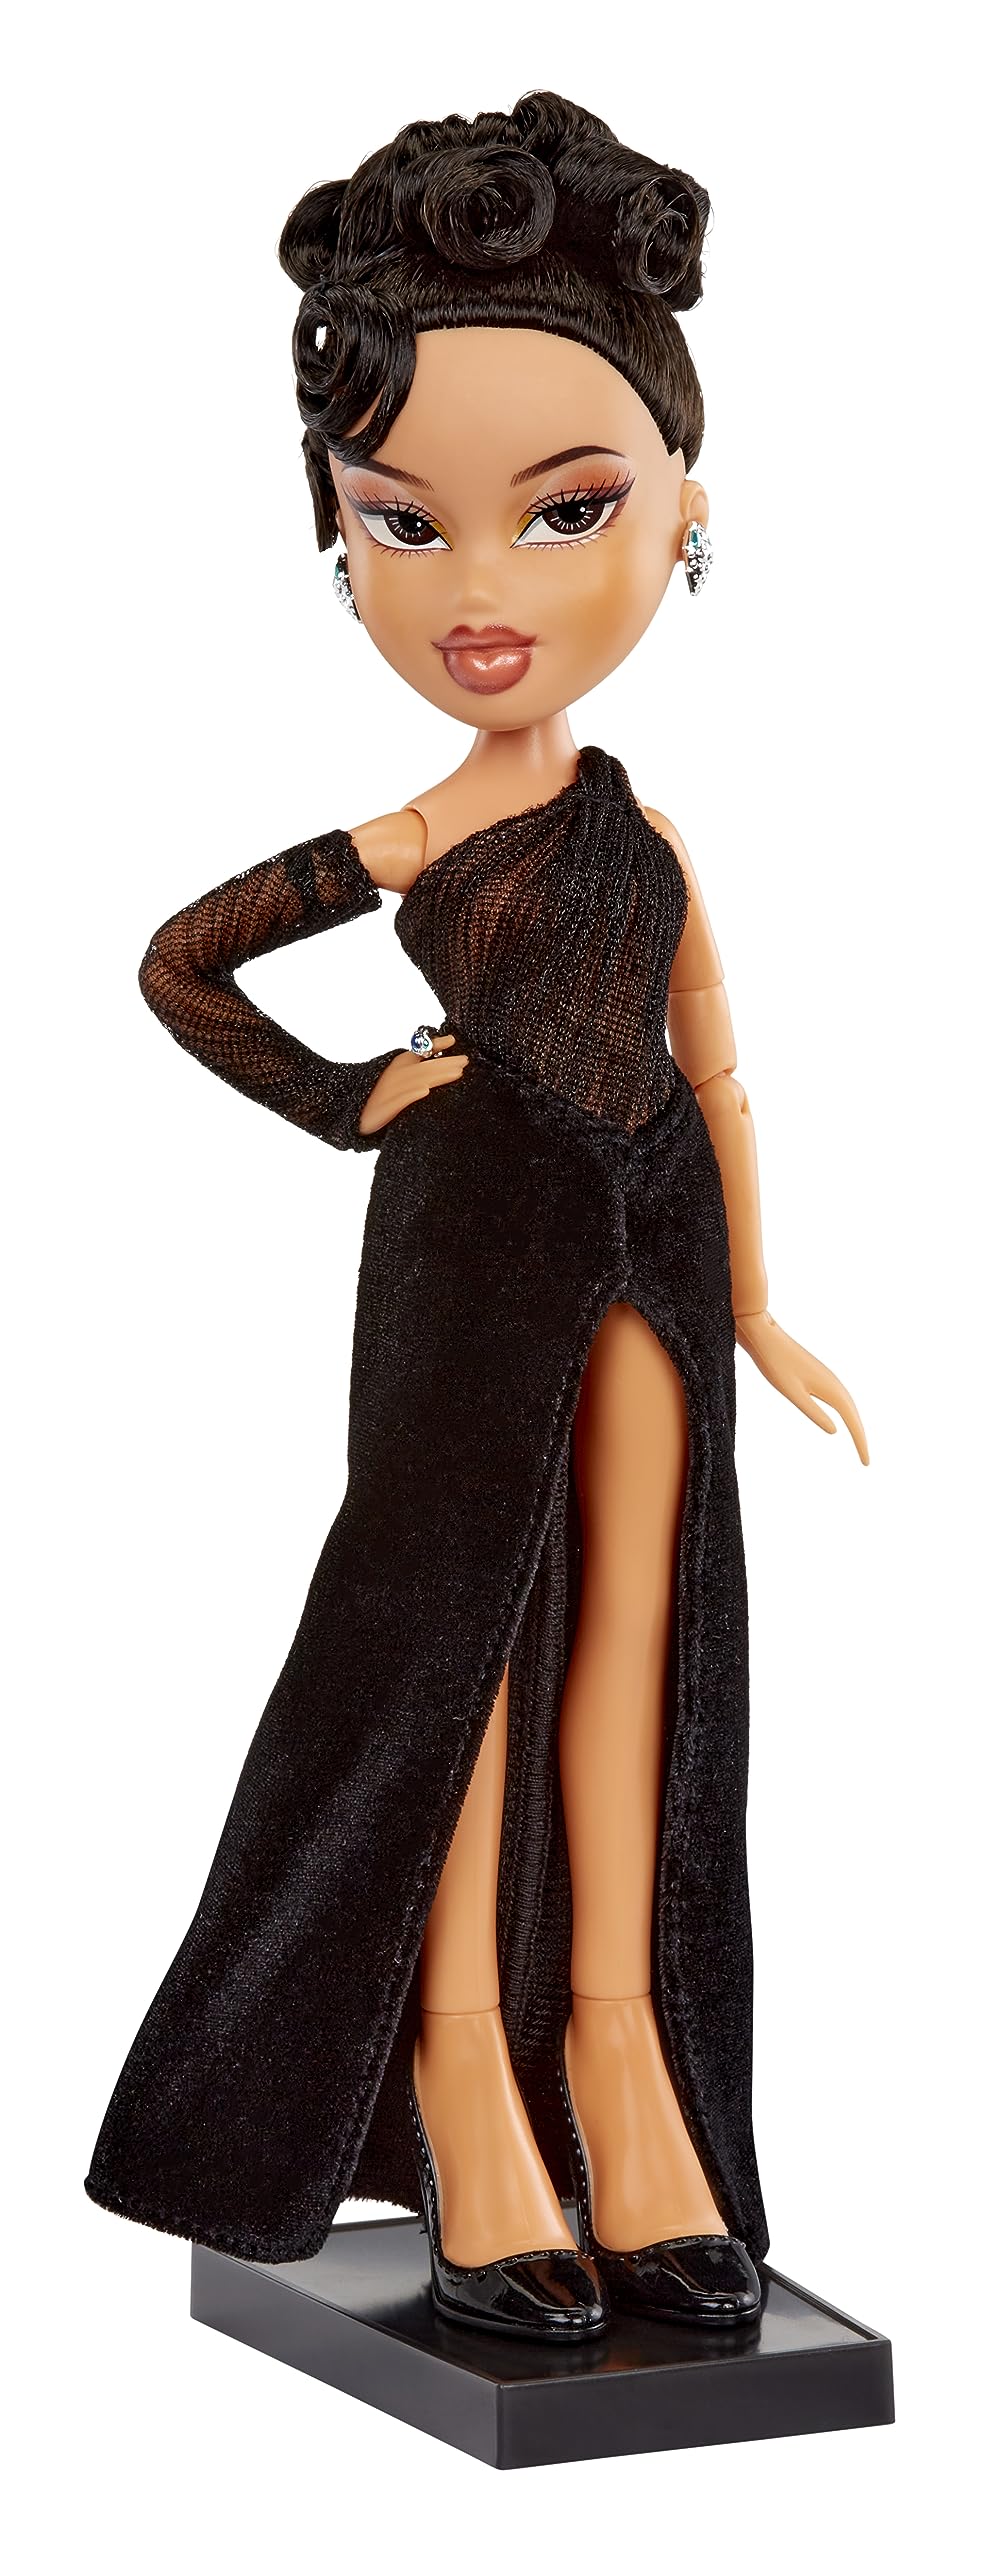 Bratz x Kylie Jenner Night Fashion Doll with Evening Gown, Pet Dog, and Poster